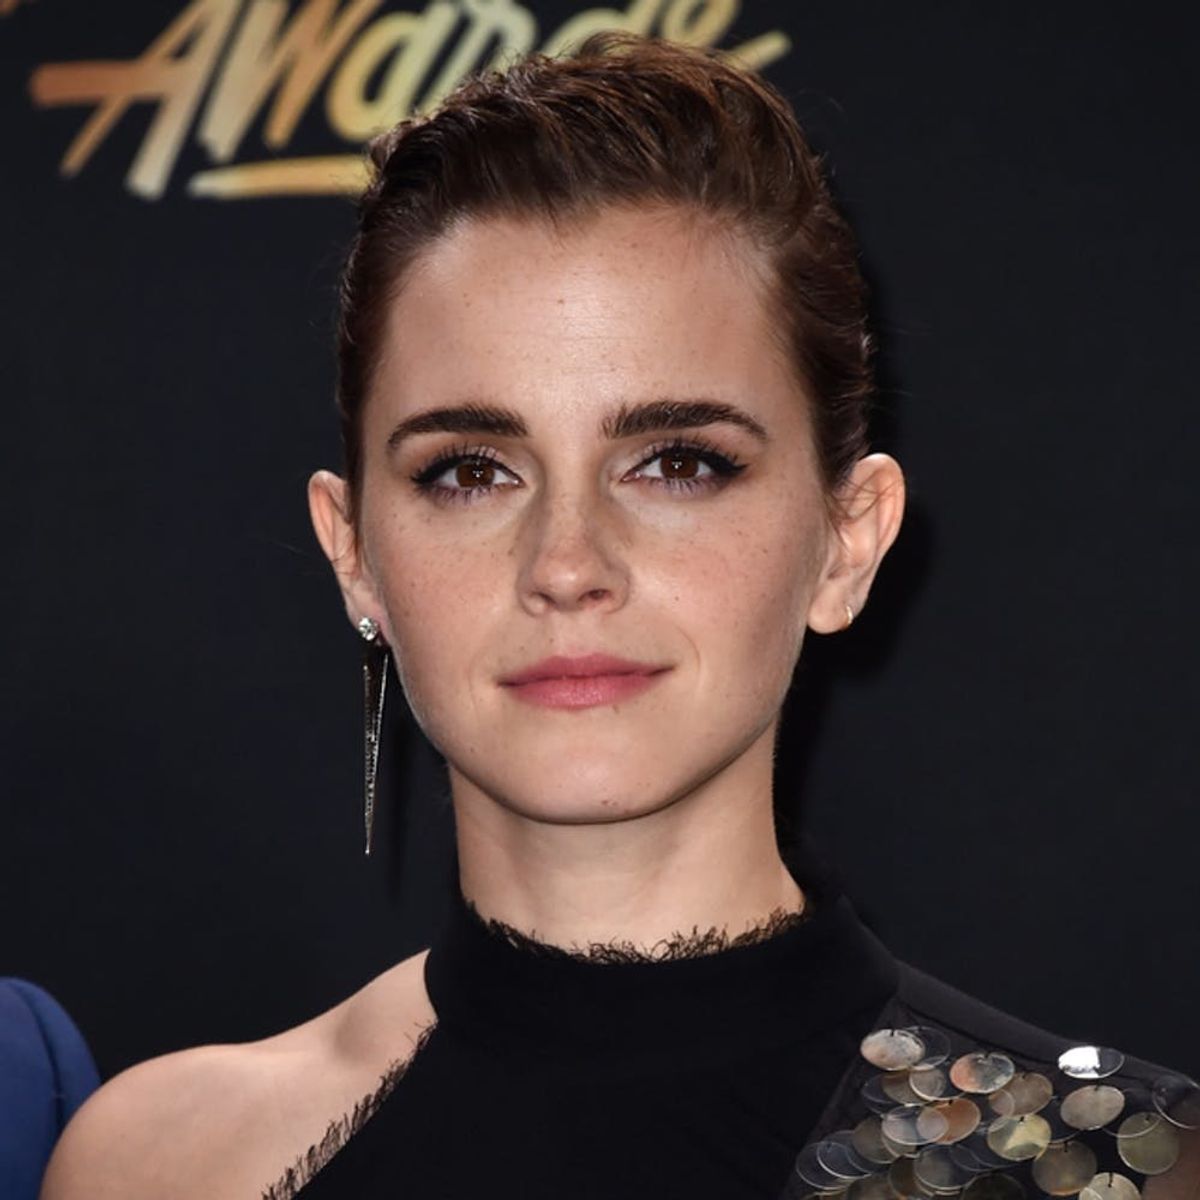 Emma Watson Lost a Special Ring and Needs Your Help